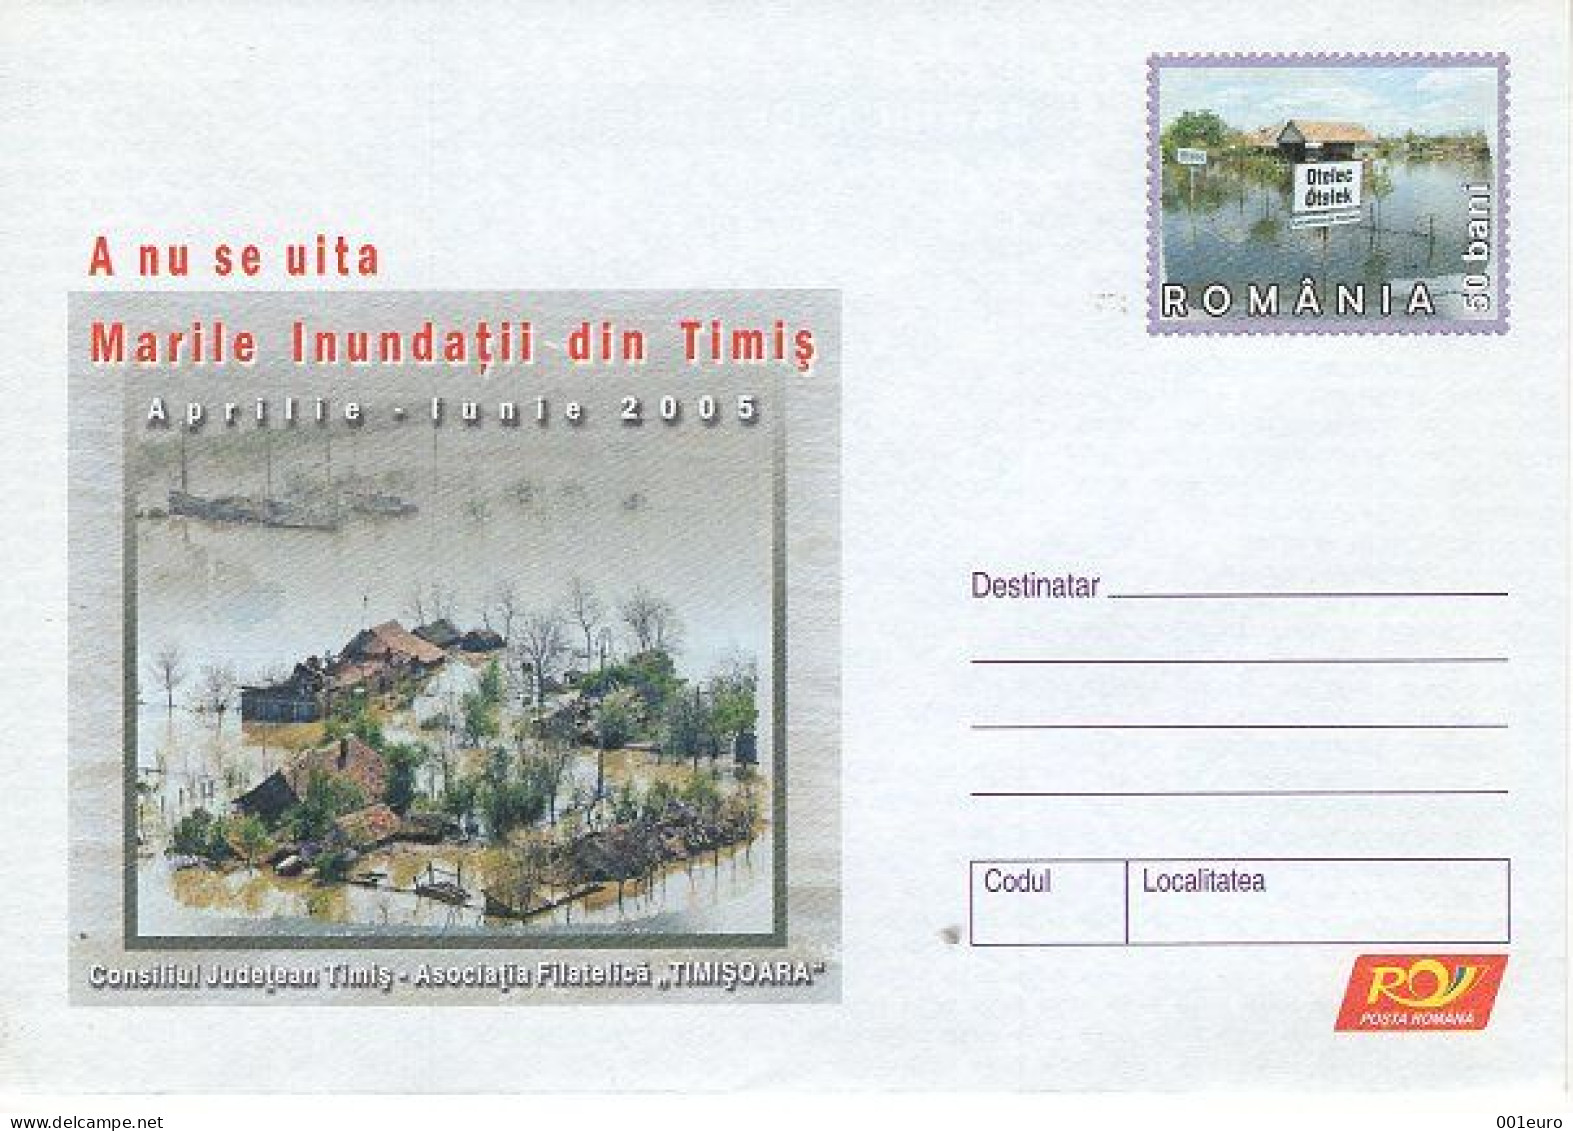 ROMANIA 074x2005: HELP FOR FLOODED AREAS, Unused Prepaid Postal Stationery Cover - Registered Shipping! - Postal Stationery